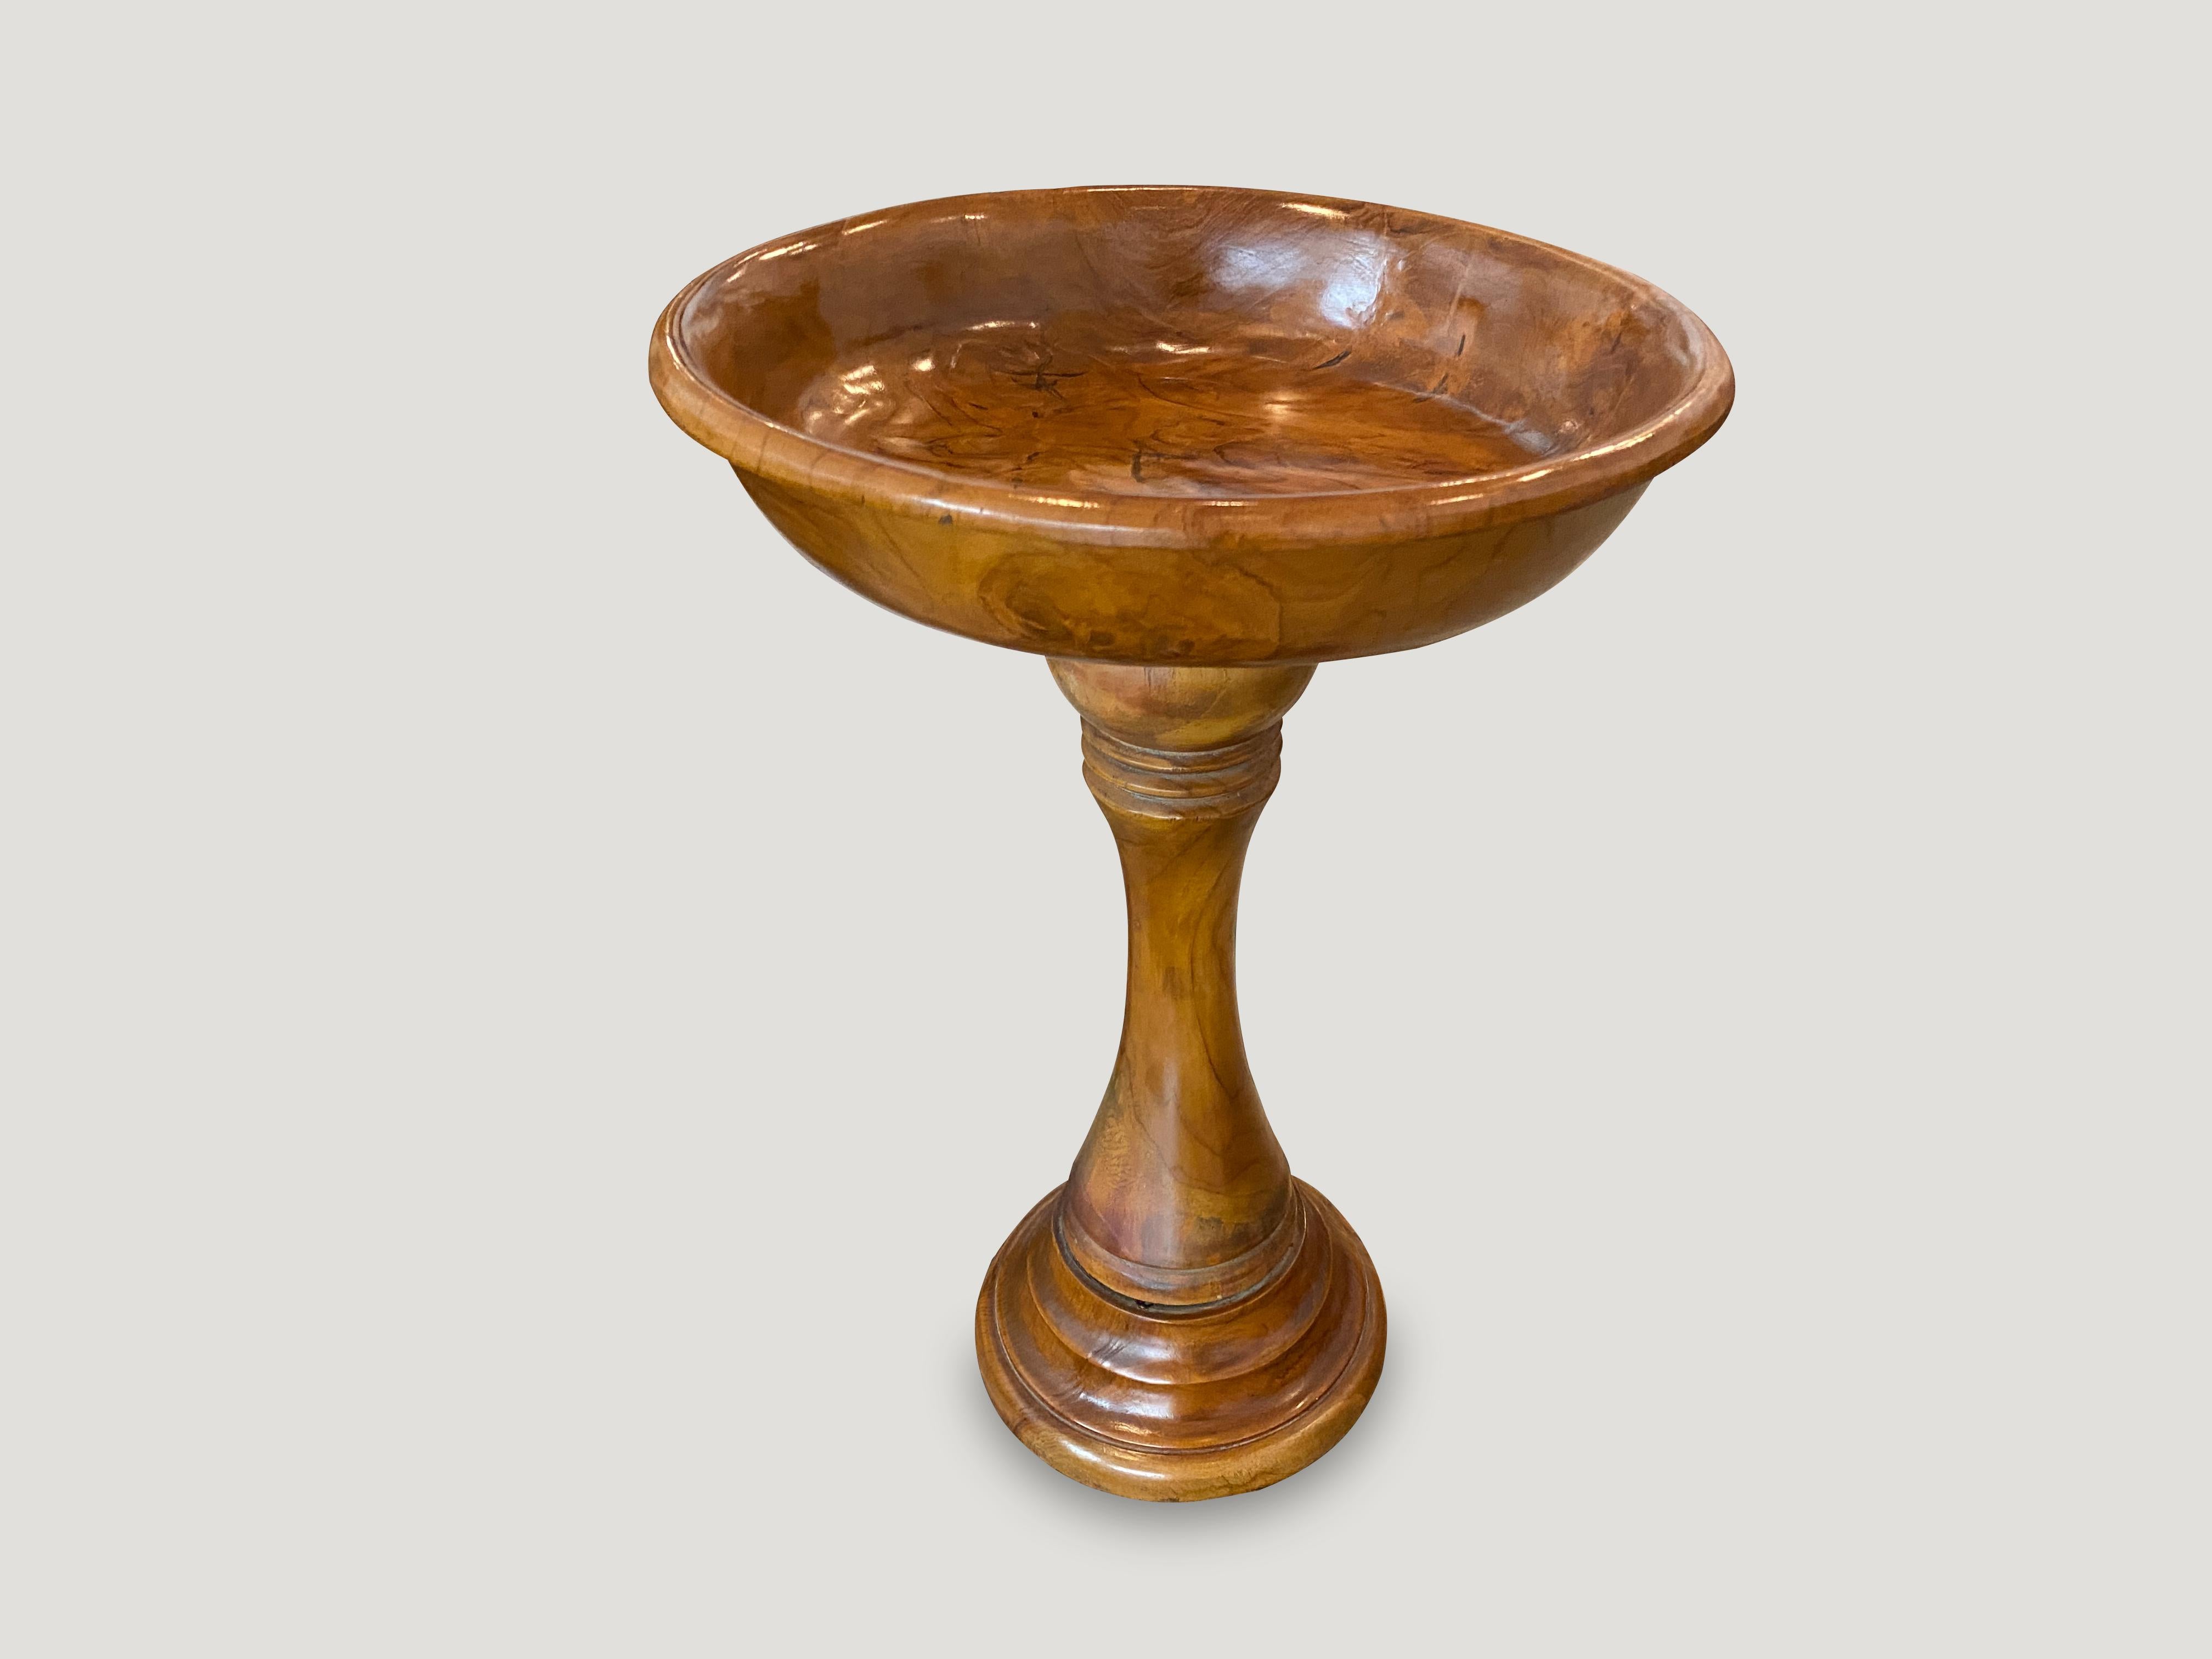 Hand carved reclaimed teak offering tray that can be used for a multitude of applications such as holding fruit, towels or soap in a bathroom to name a few examples.

Andrianna Shamaris. The Leader In Modern Organic Design.